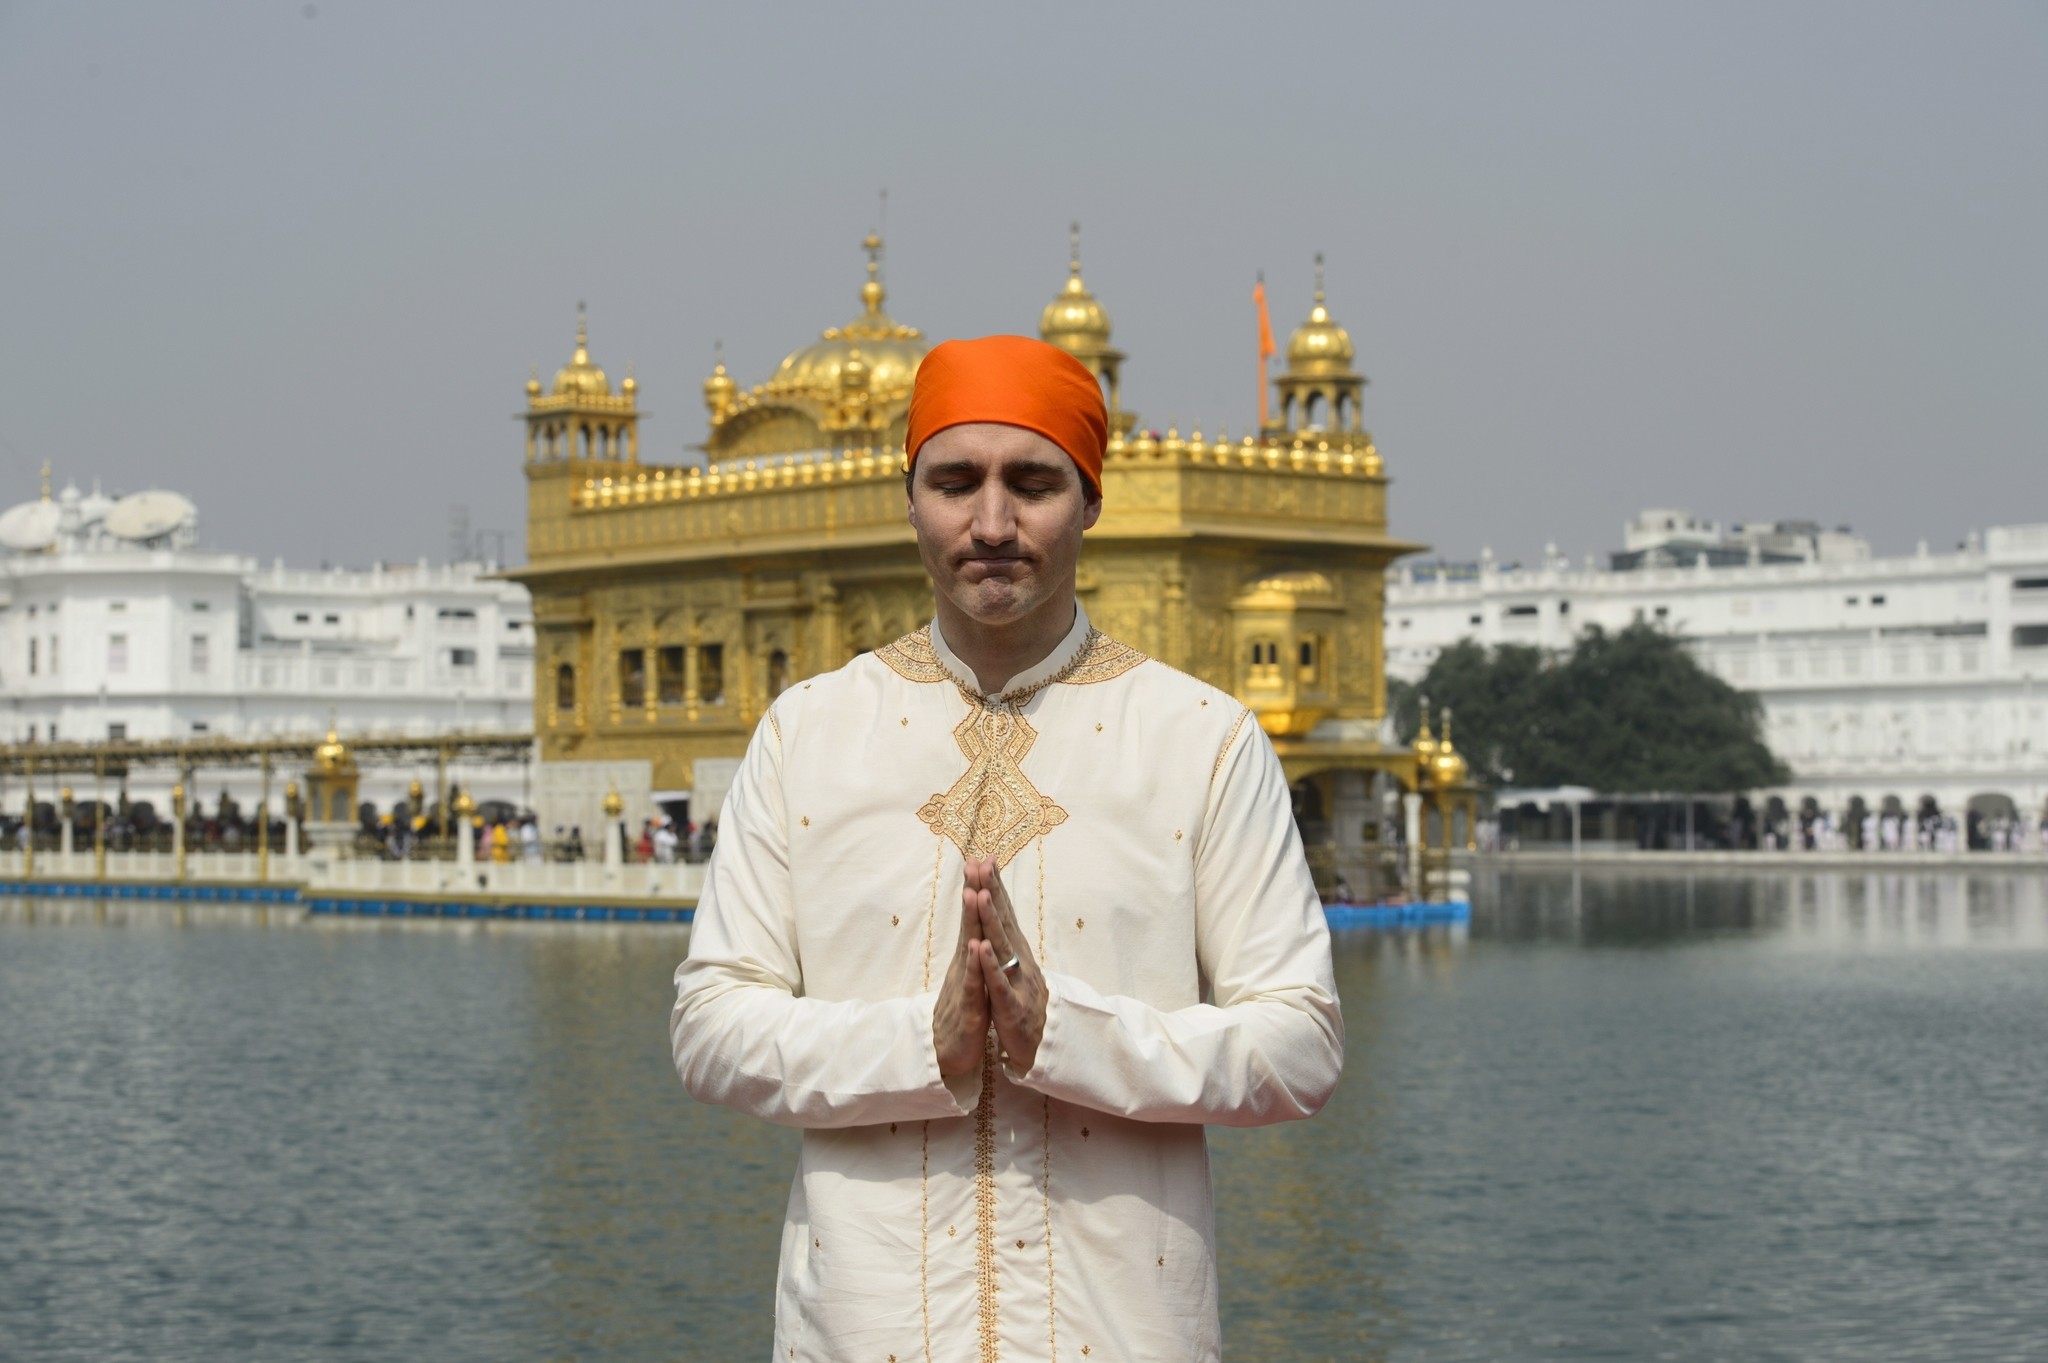 Canadian Prime Minister Justin Trudeau visits the Golden Temple in Amritsar, India on Wednesday, Feb. 21, 2018.   (The Canadian Press via AP)